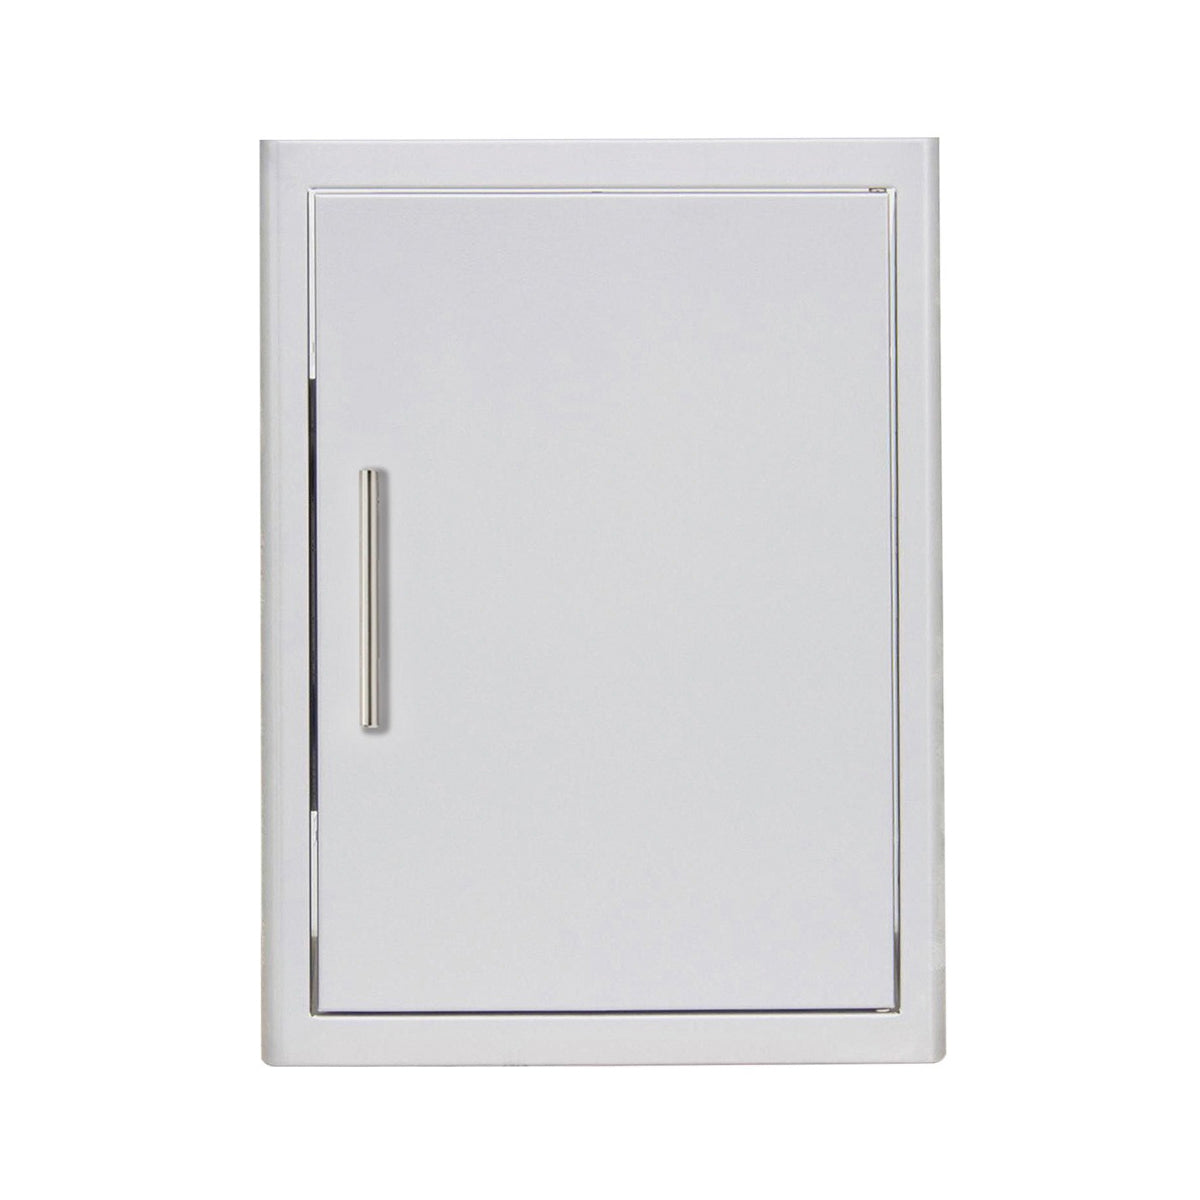 18" Single Access Right-Hinged Door with Soft Close Hinges - BLZ-SV-1420-R -SC